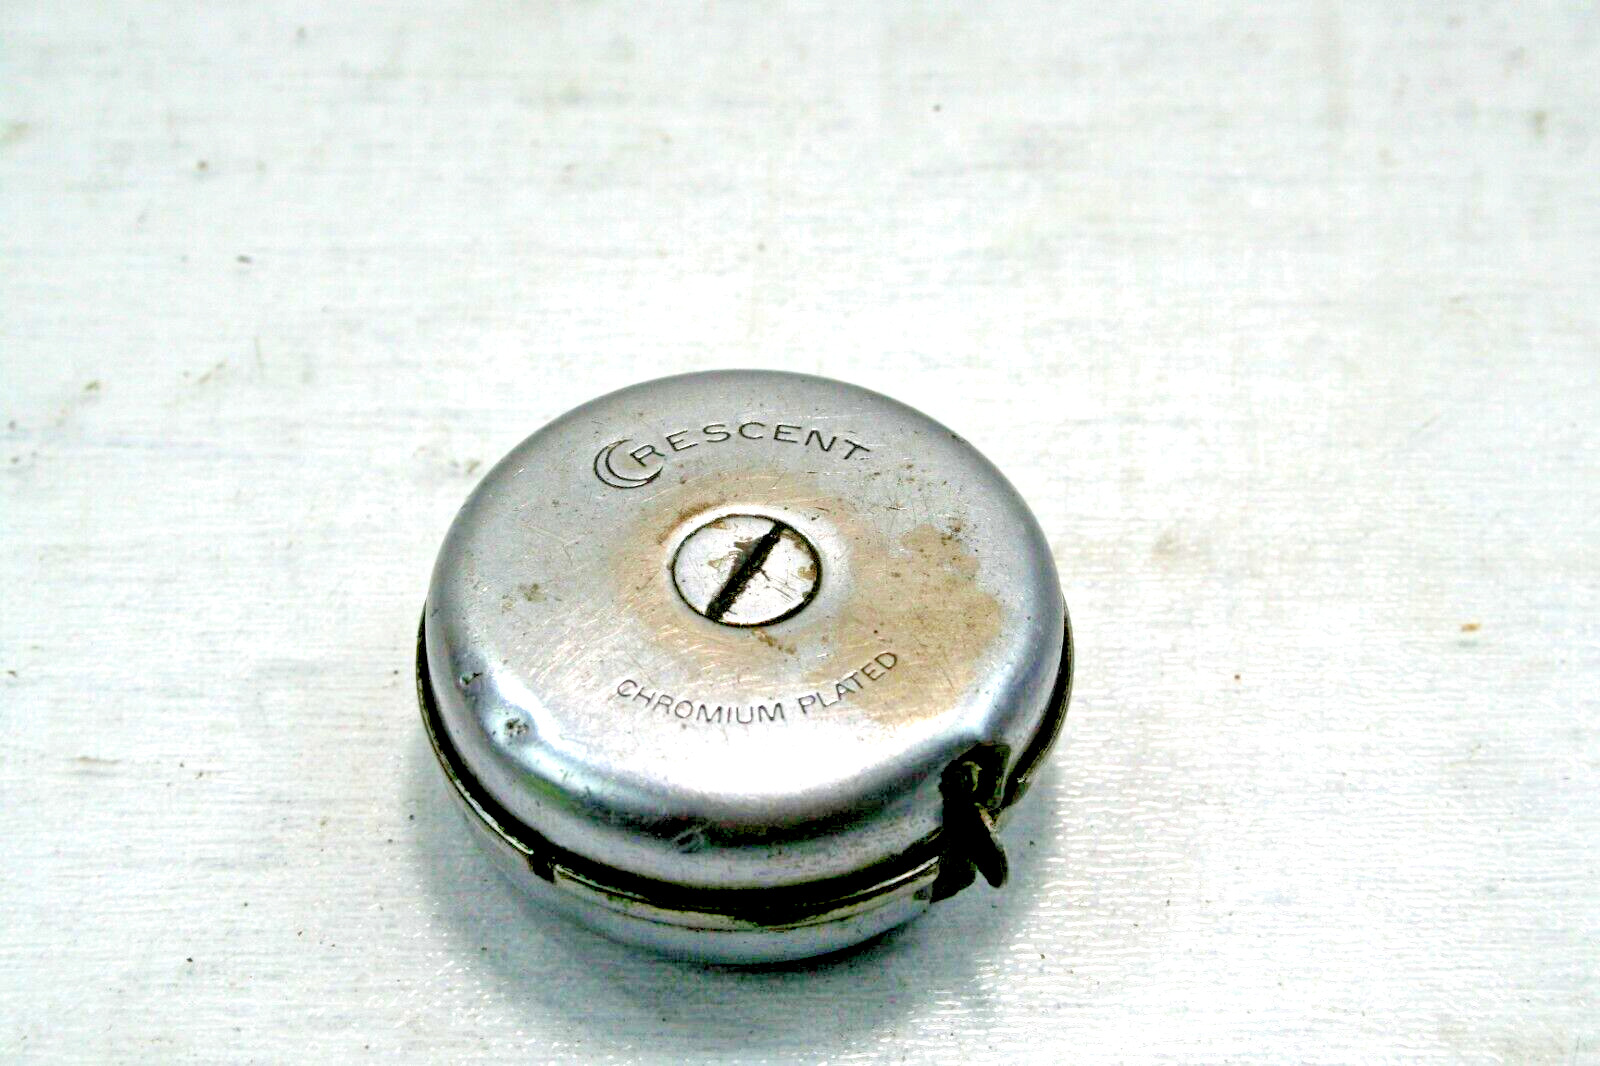 VINTAGE CRESCENT CHROME PLATED THE RUFKIN RULE CO TAPE MEASURE NO 696 